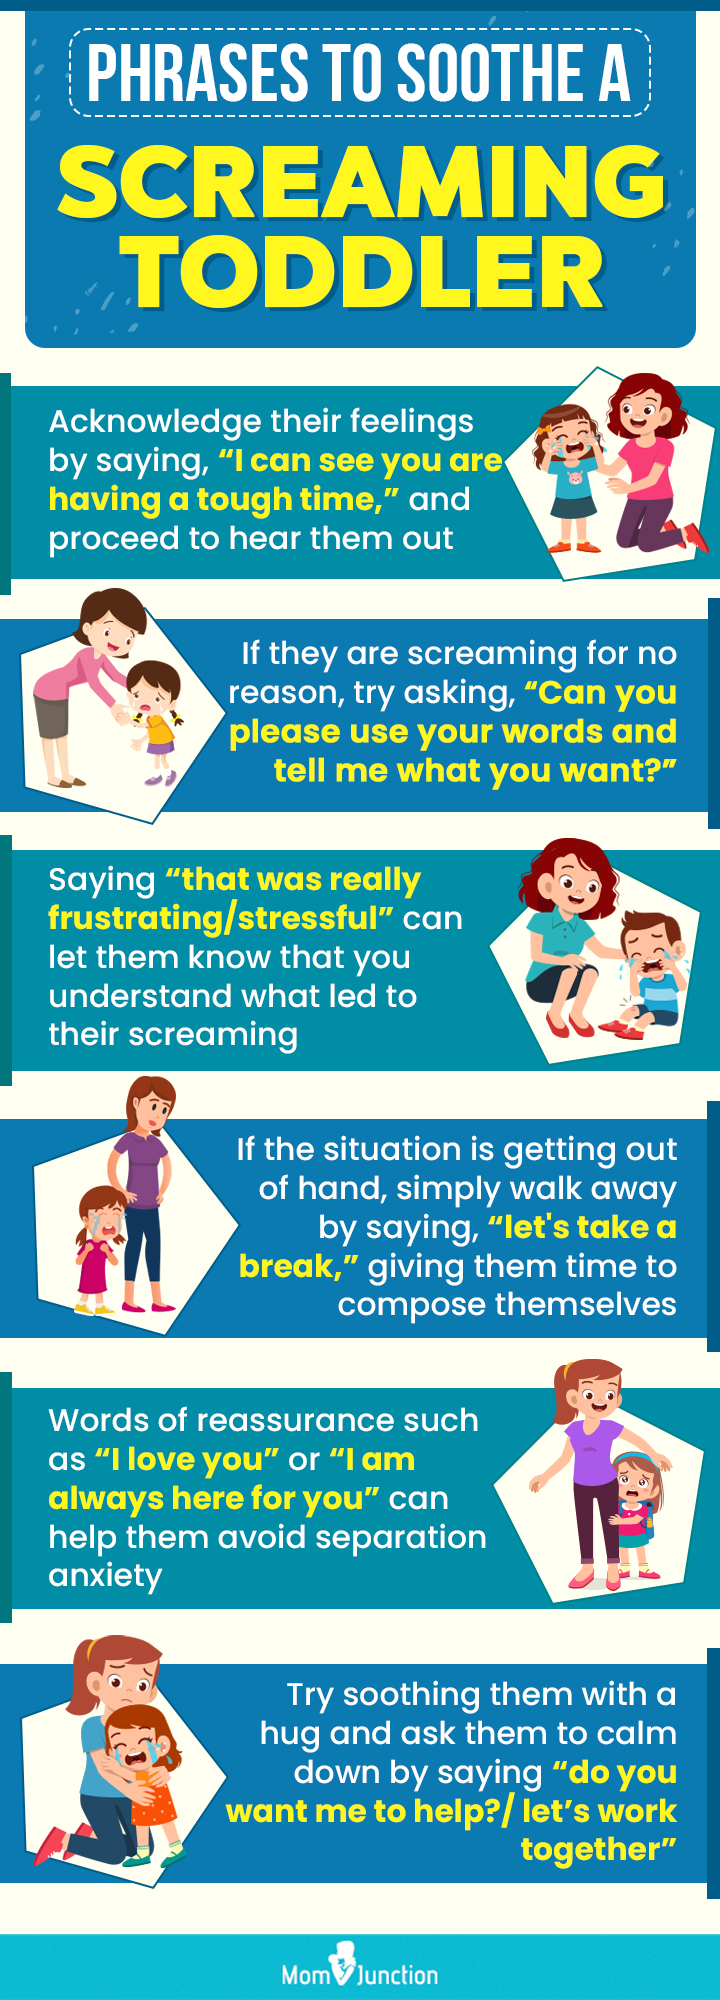 phrases to soothe a screaming toddler (infographic)